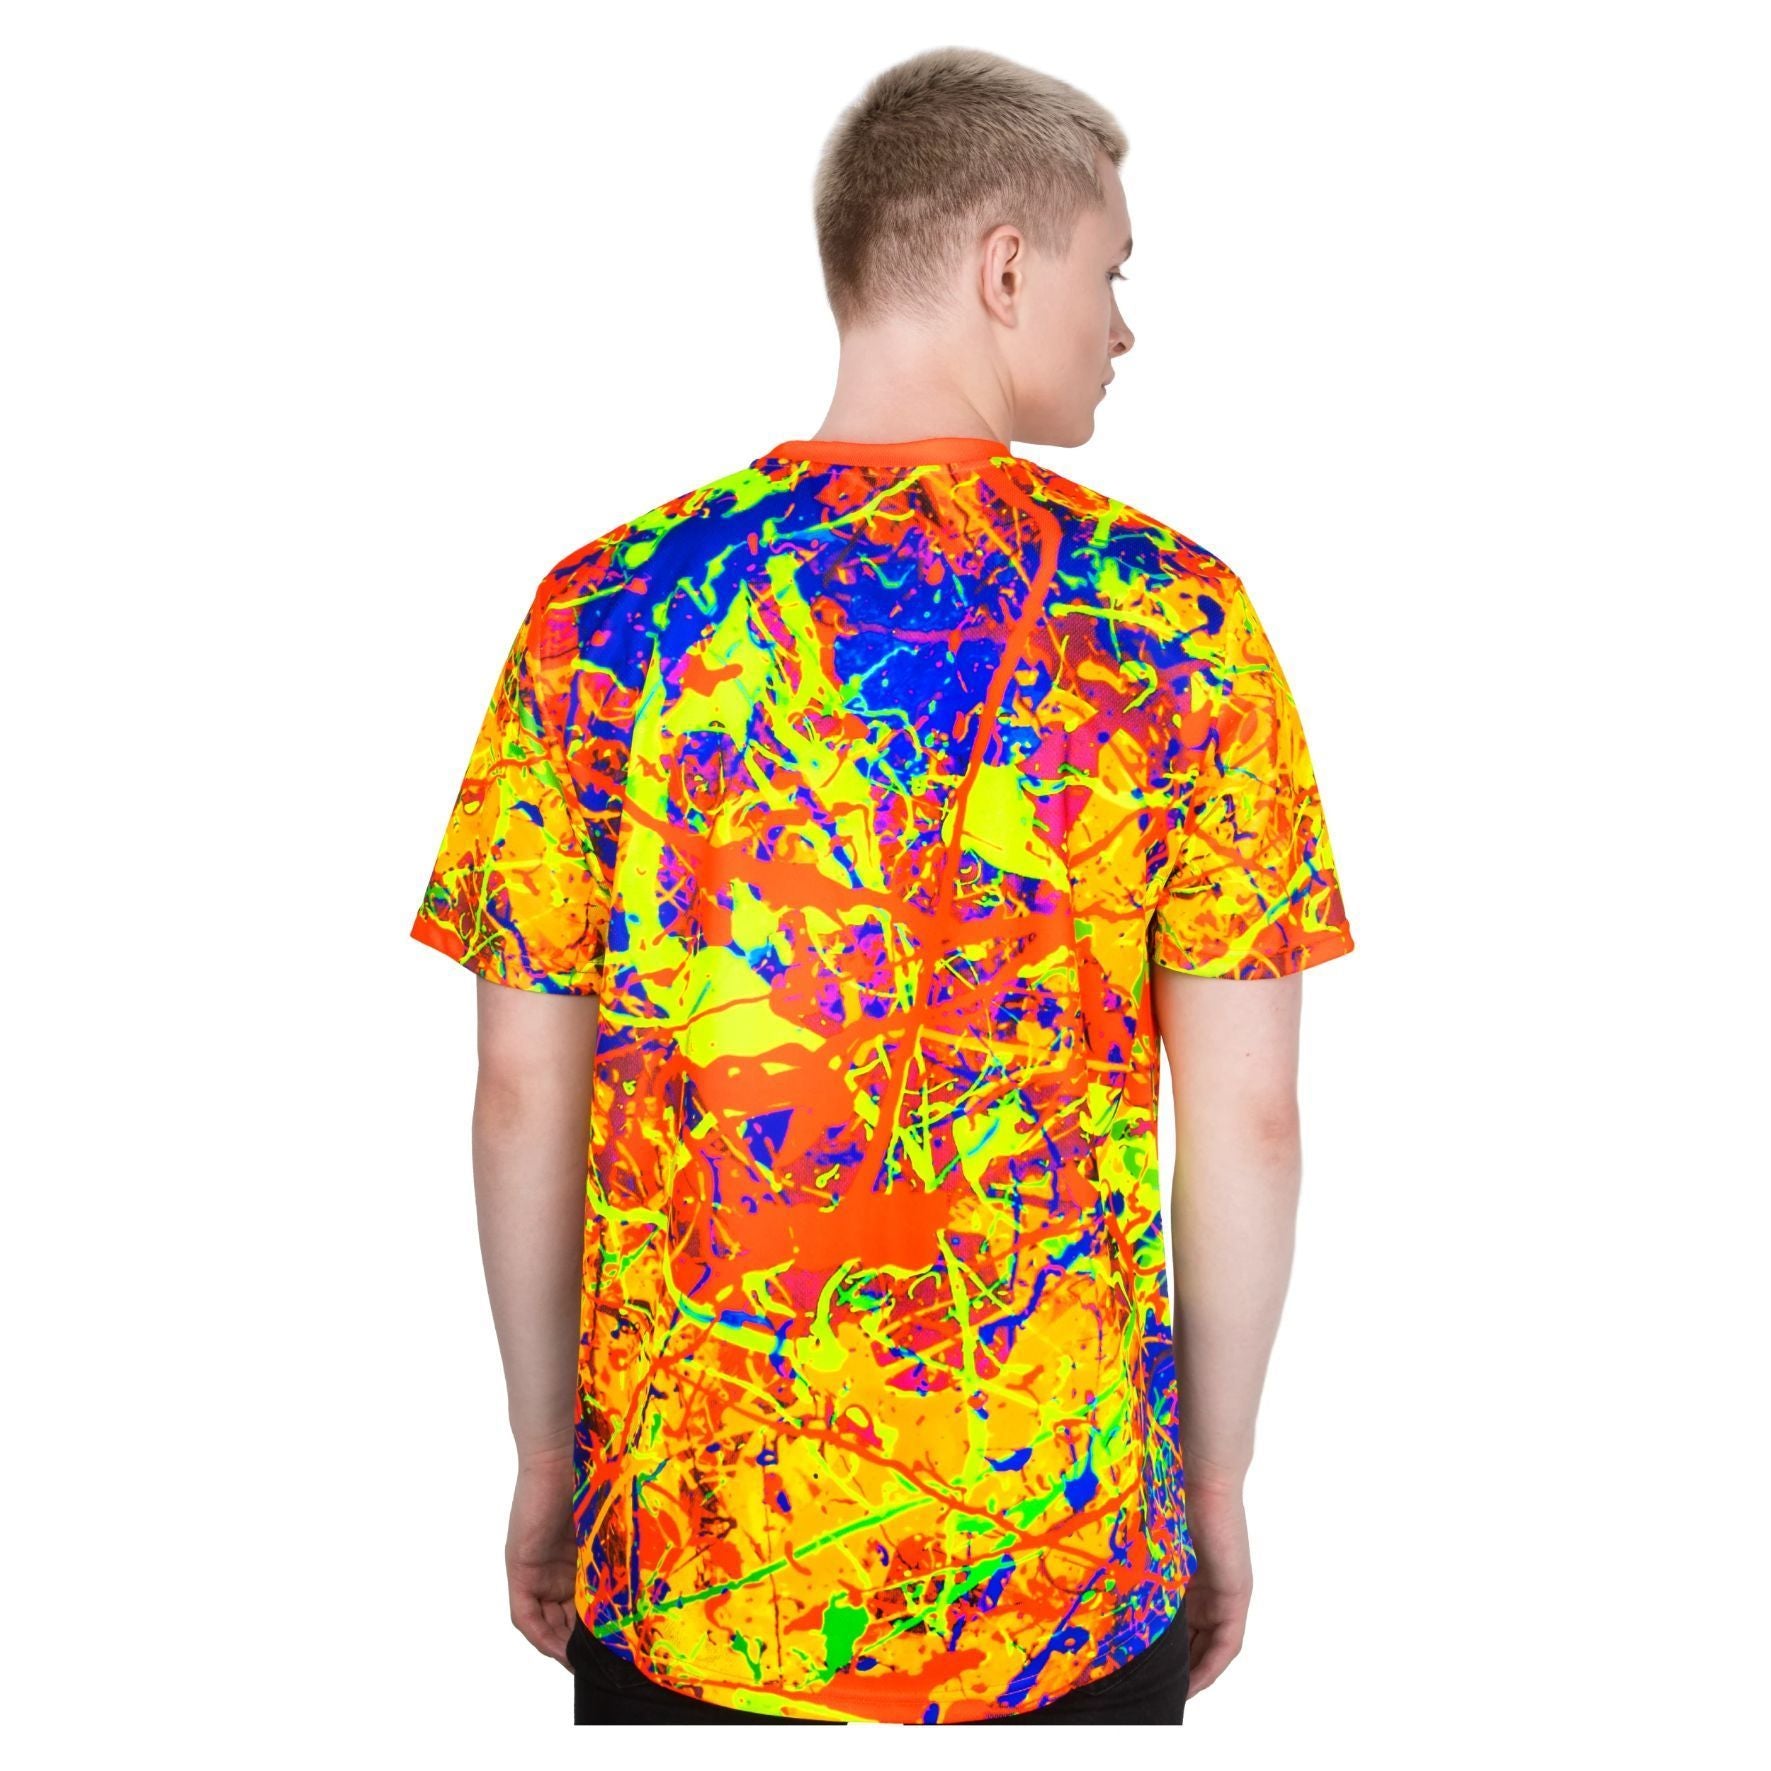 Neon Color T Shirts for Sale Glow in UV Fluorescent Ginger Bees ts37